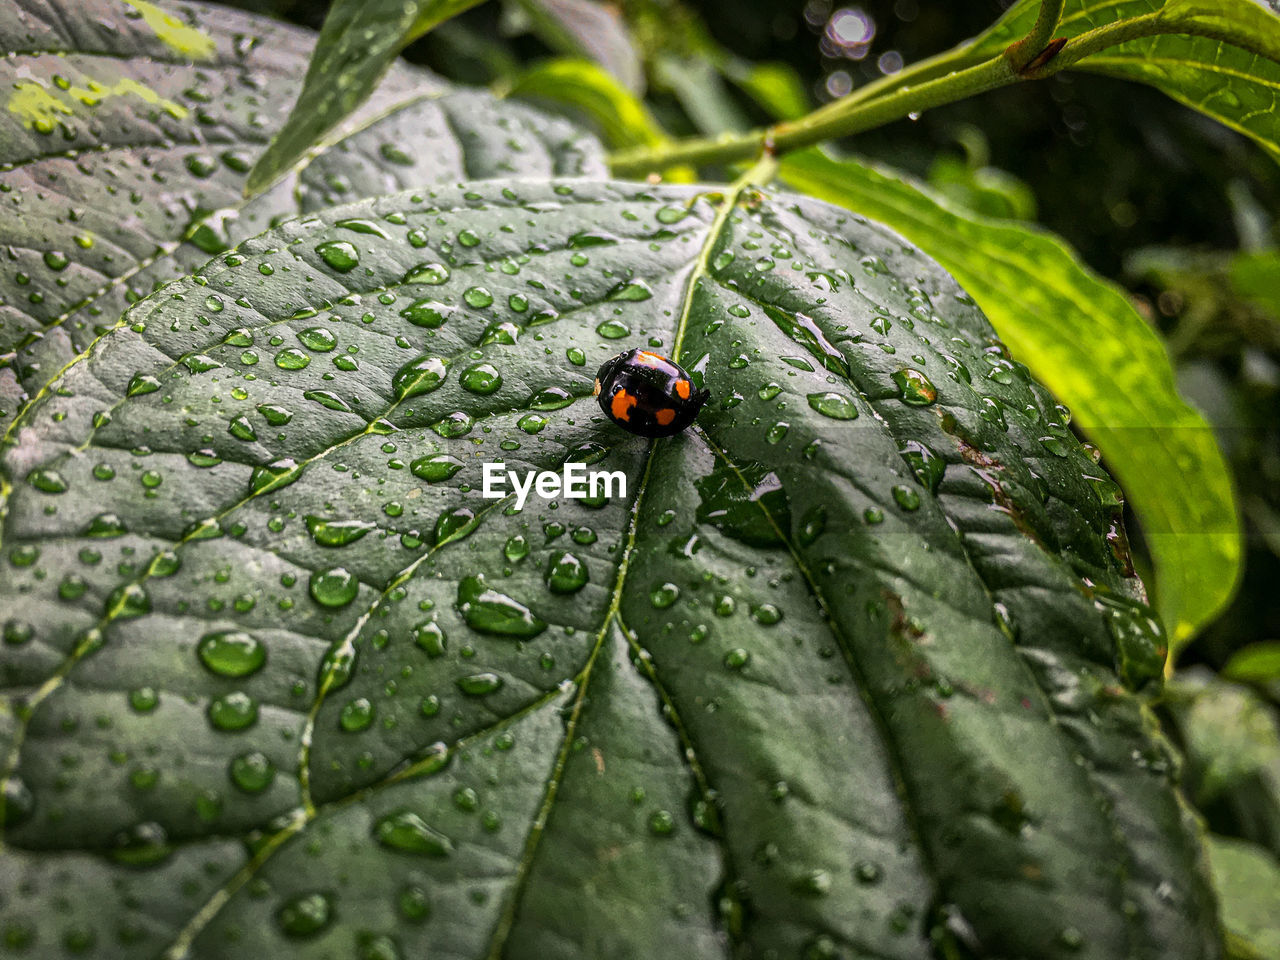 green, nature, leaf, animal themes, animal, animal wildlife, insect, plant part, close-up, one animal, wildlife, macro photography, plant, beetle, ladybug, no people, flower, wet, drop, day, outdoors, water, beauty in nature, selective focus, environment, tree, growth